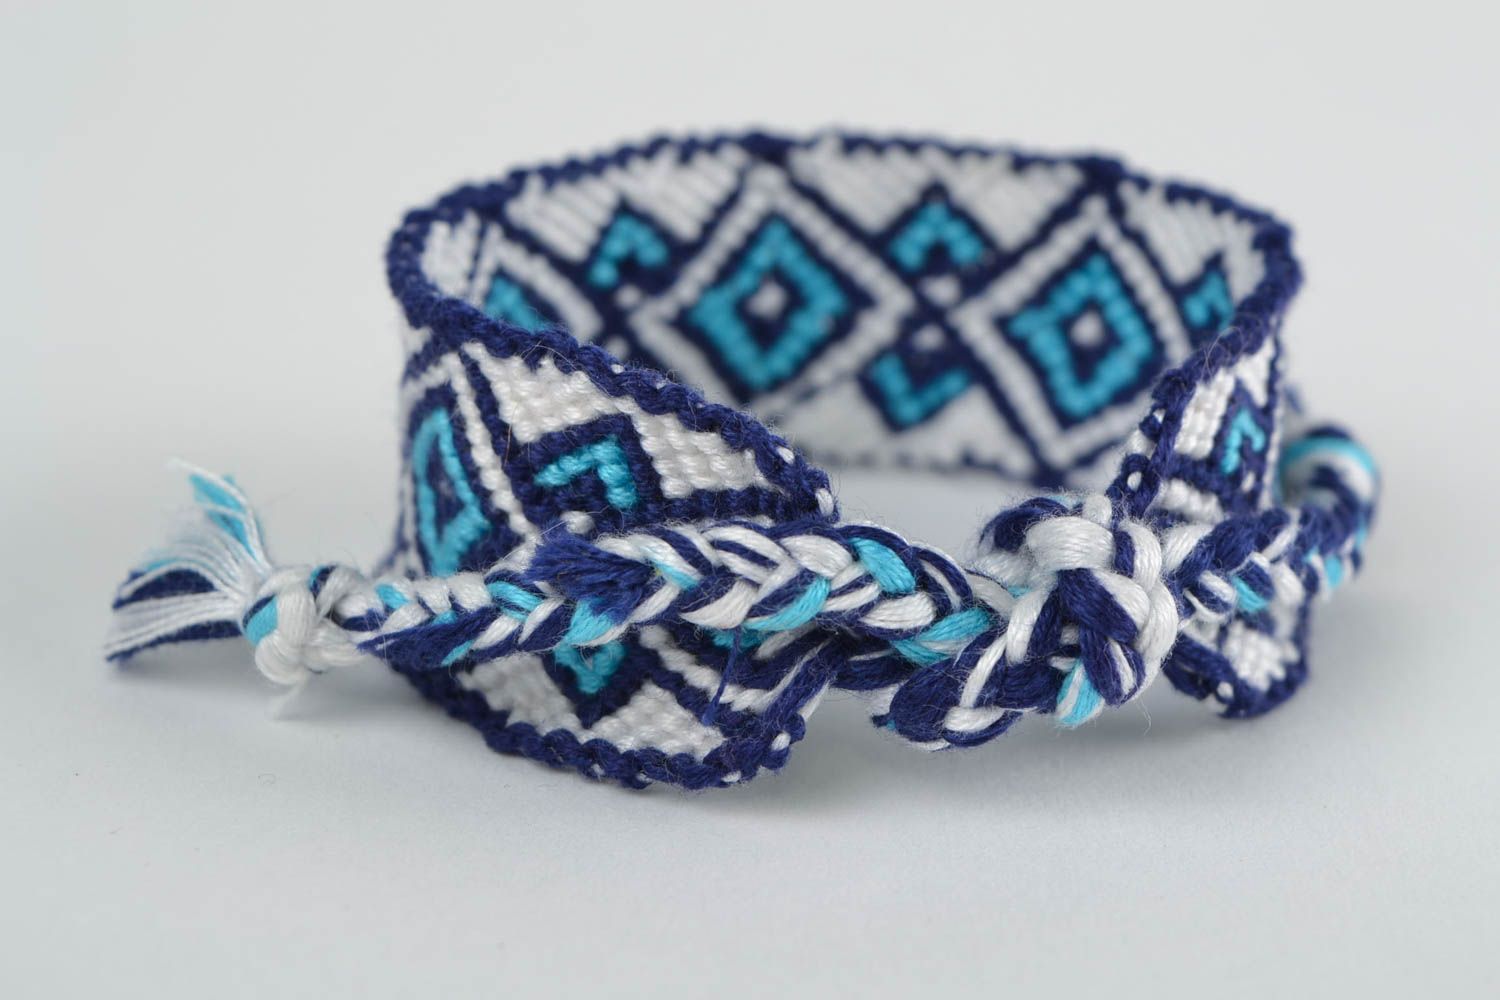 Handmade macrame bracelet woven of white and blue embroidery floss with ornament photo 4